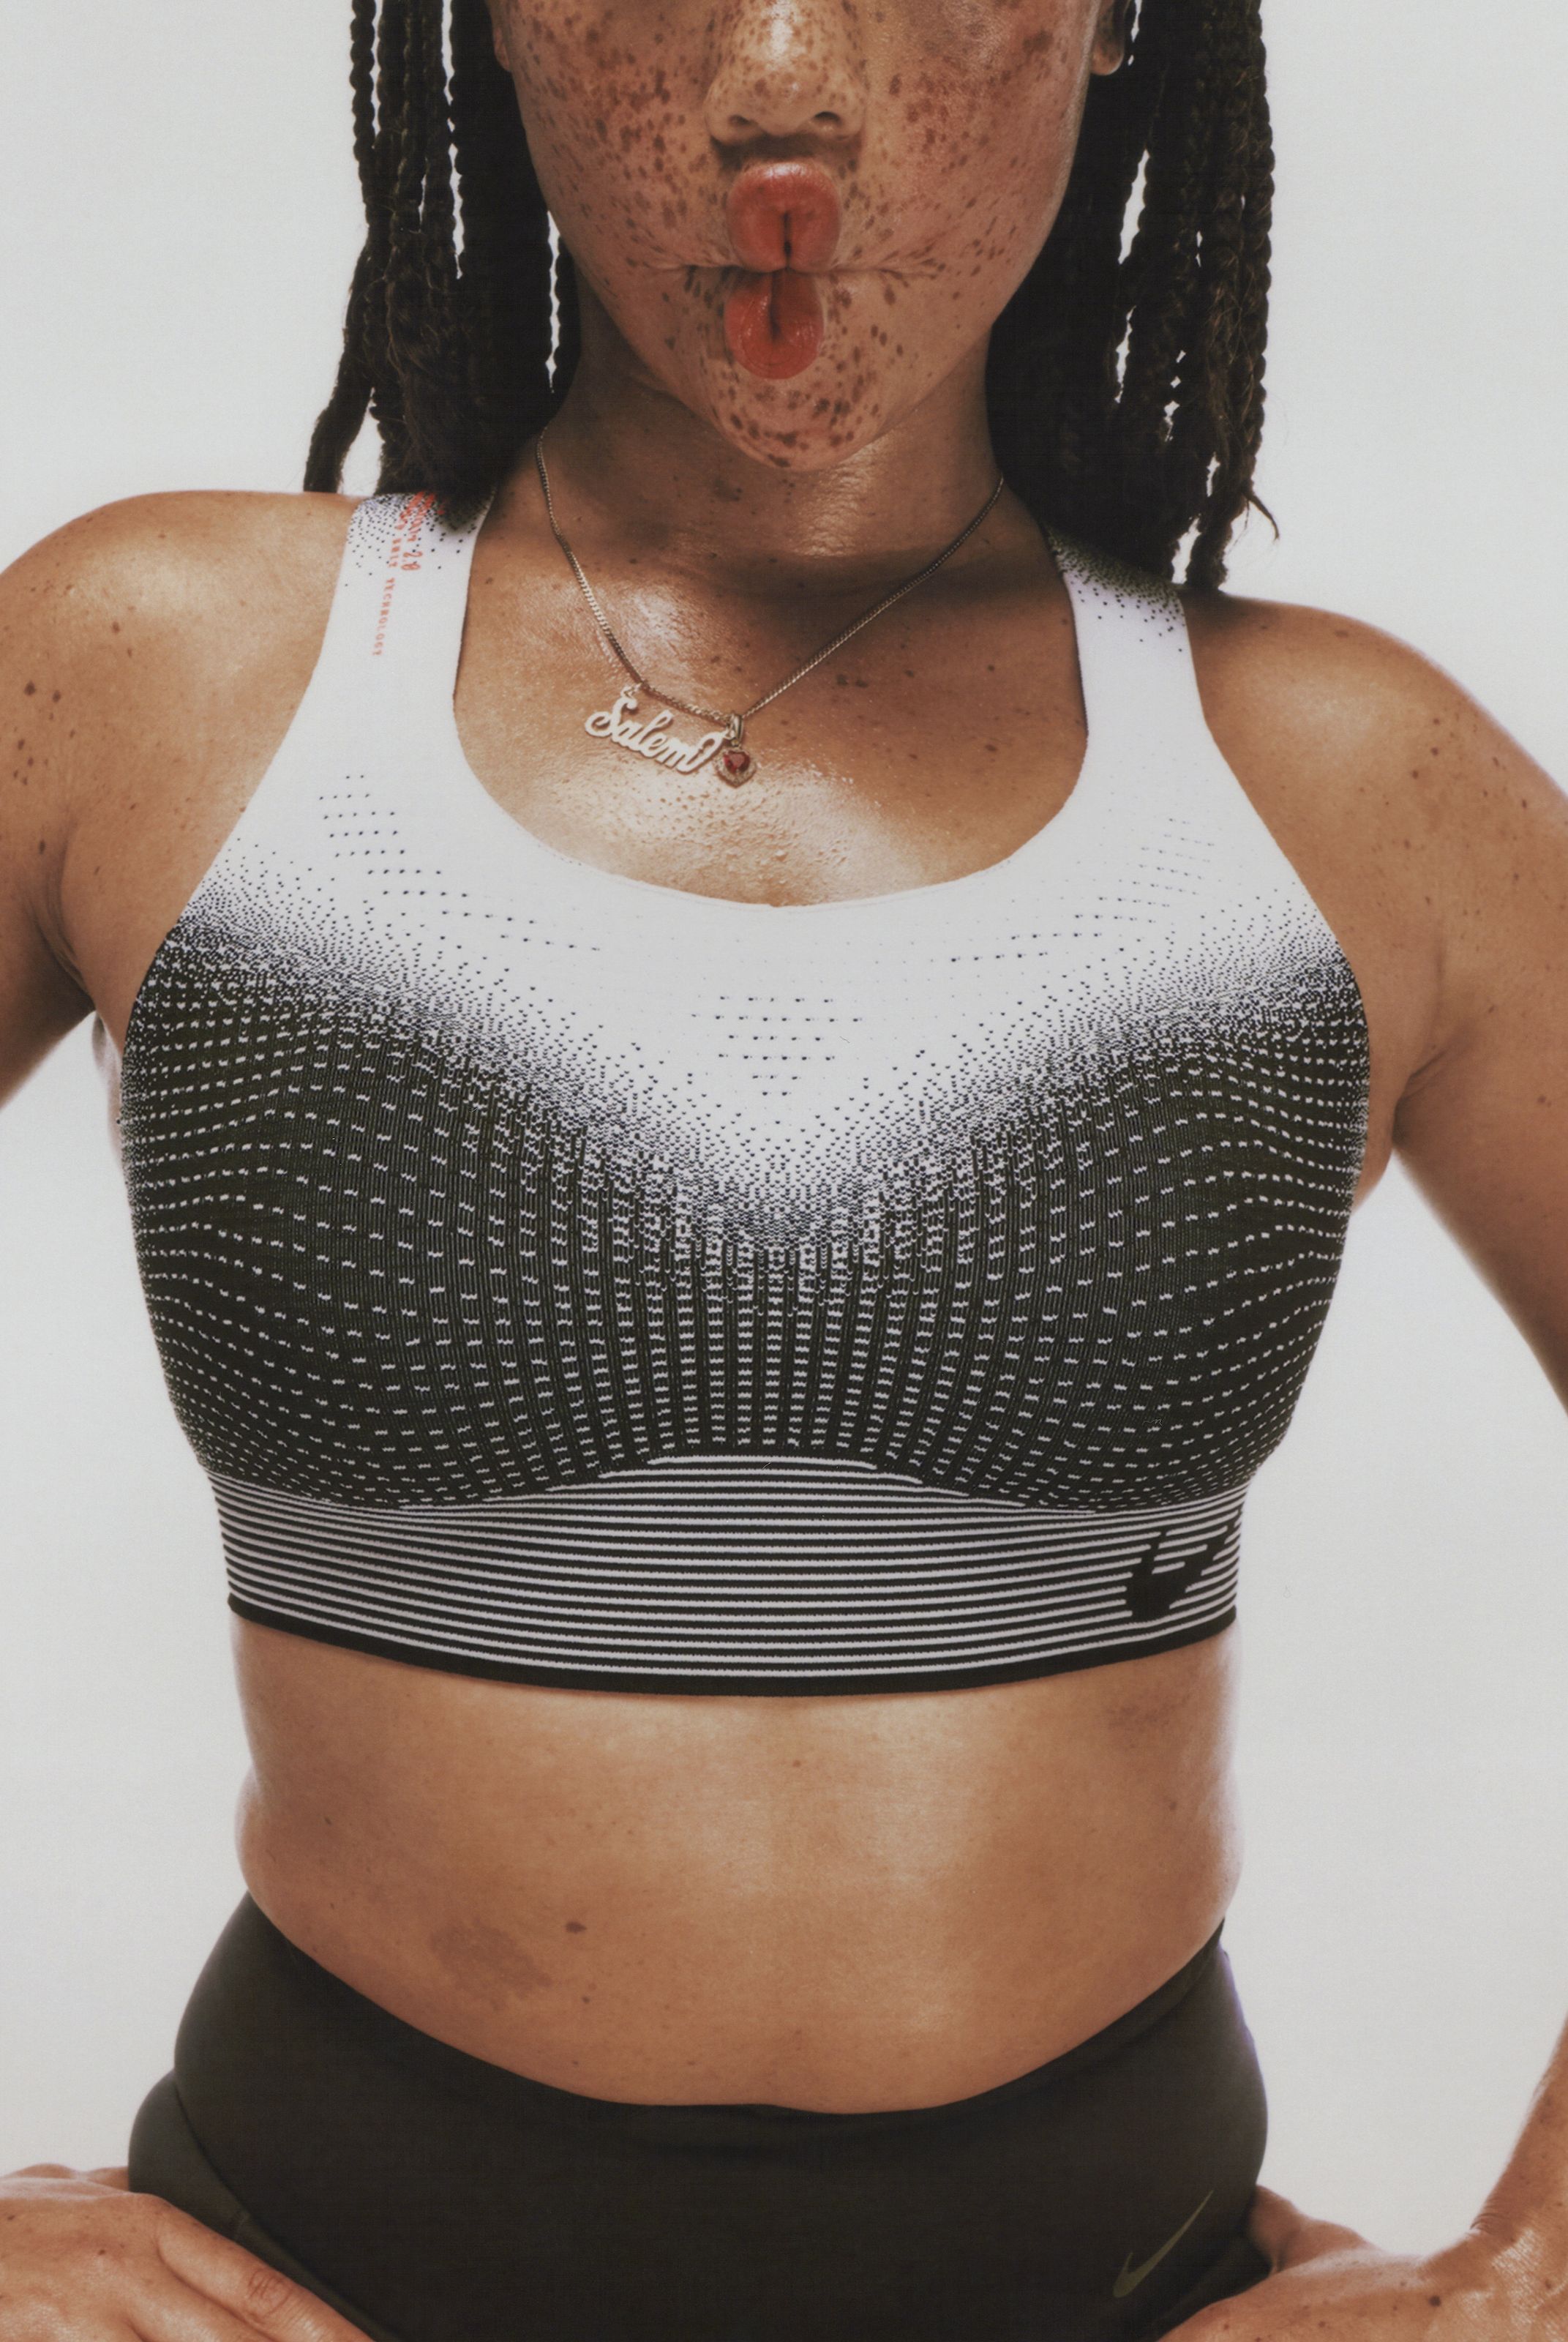 The Latest Innovation In Sports Bra Technology From Nike